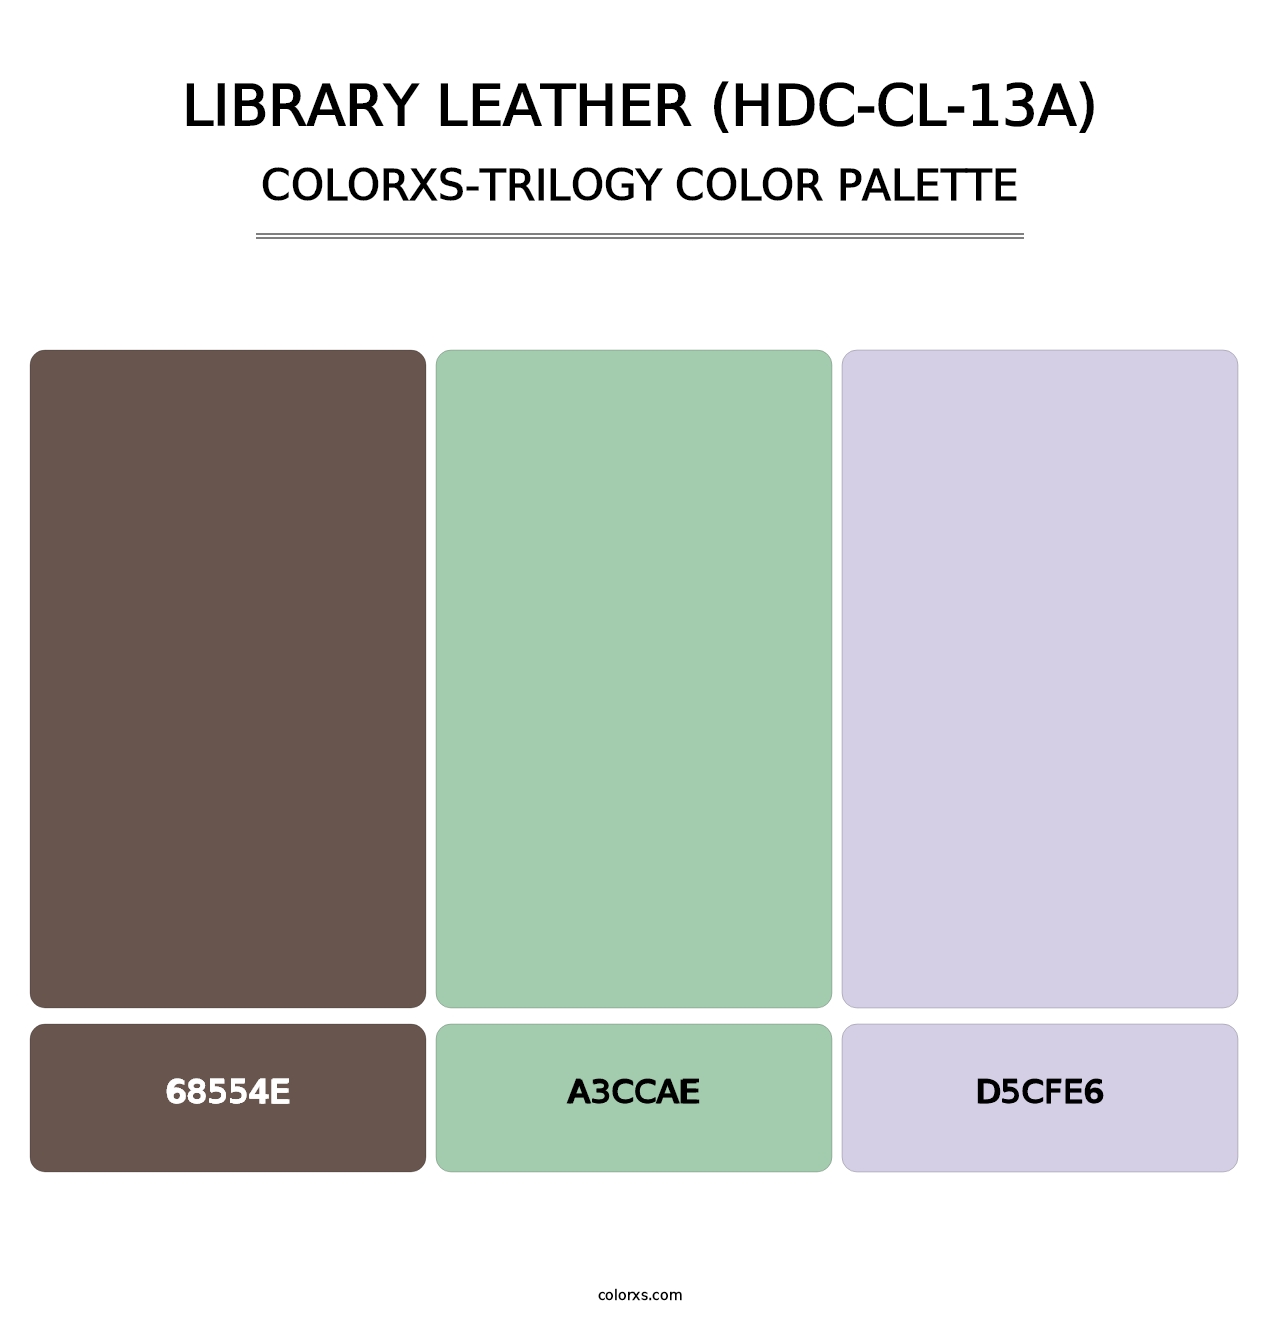 Library Leather (HDC-CL-13A) - Colorxs Trilogy Palette